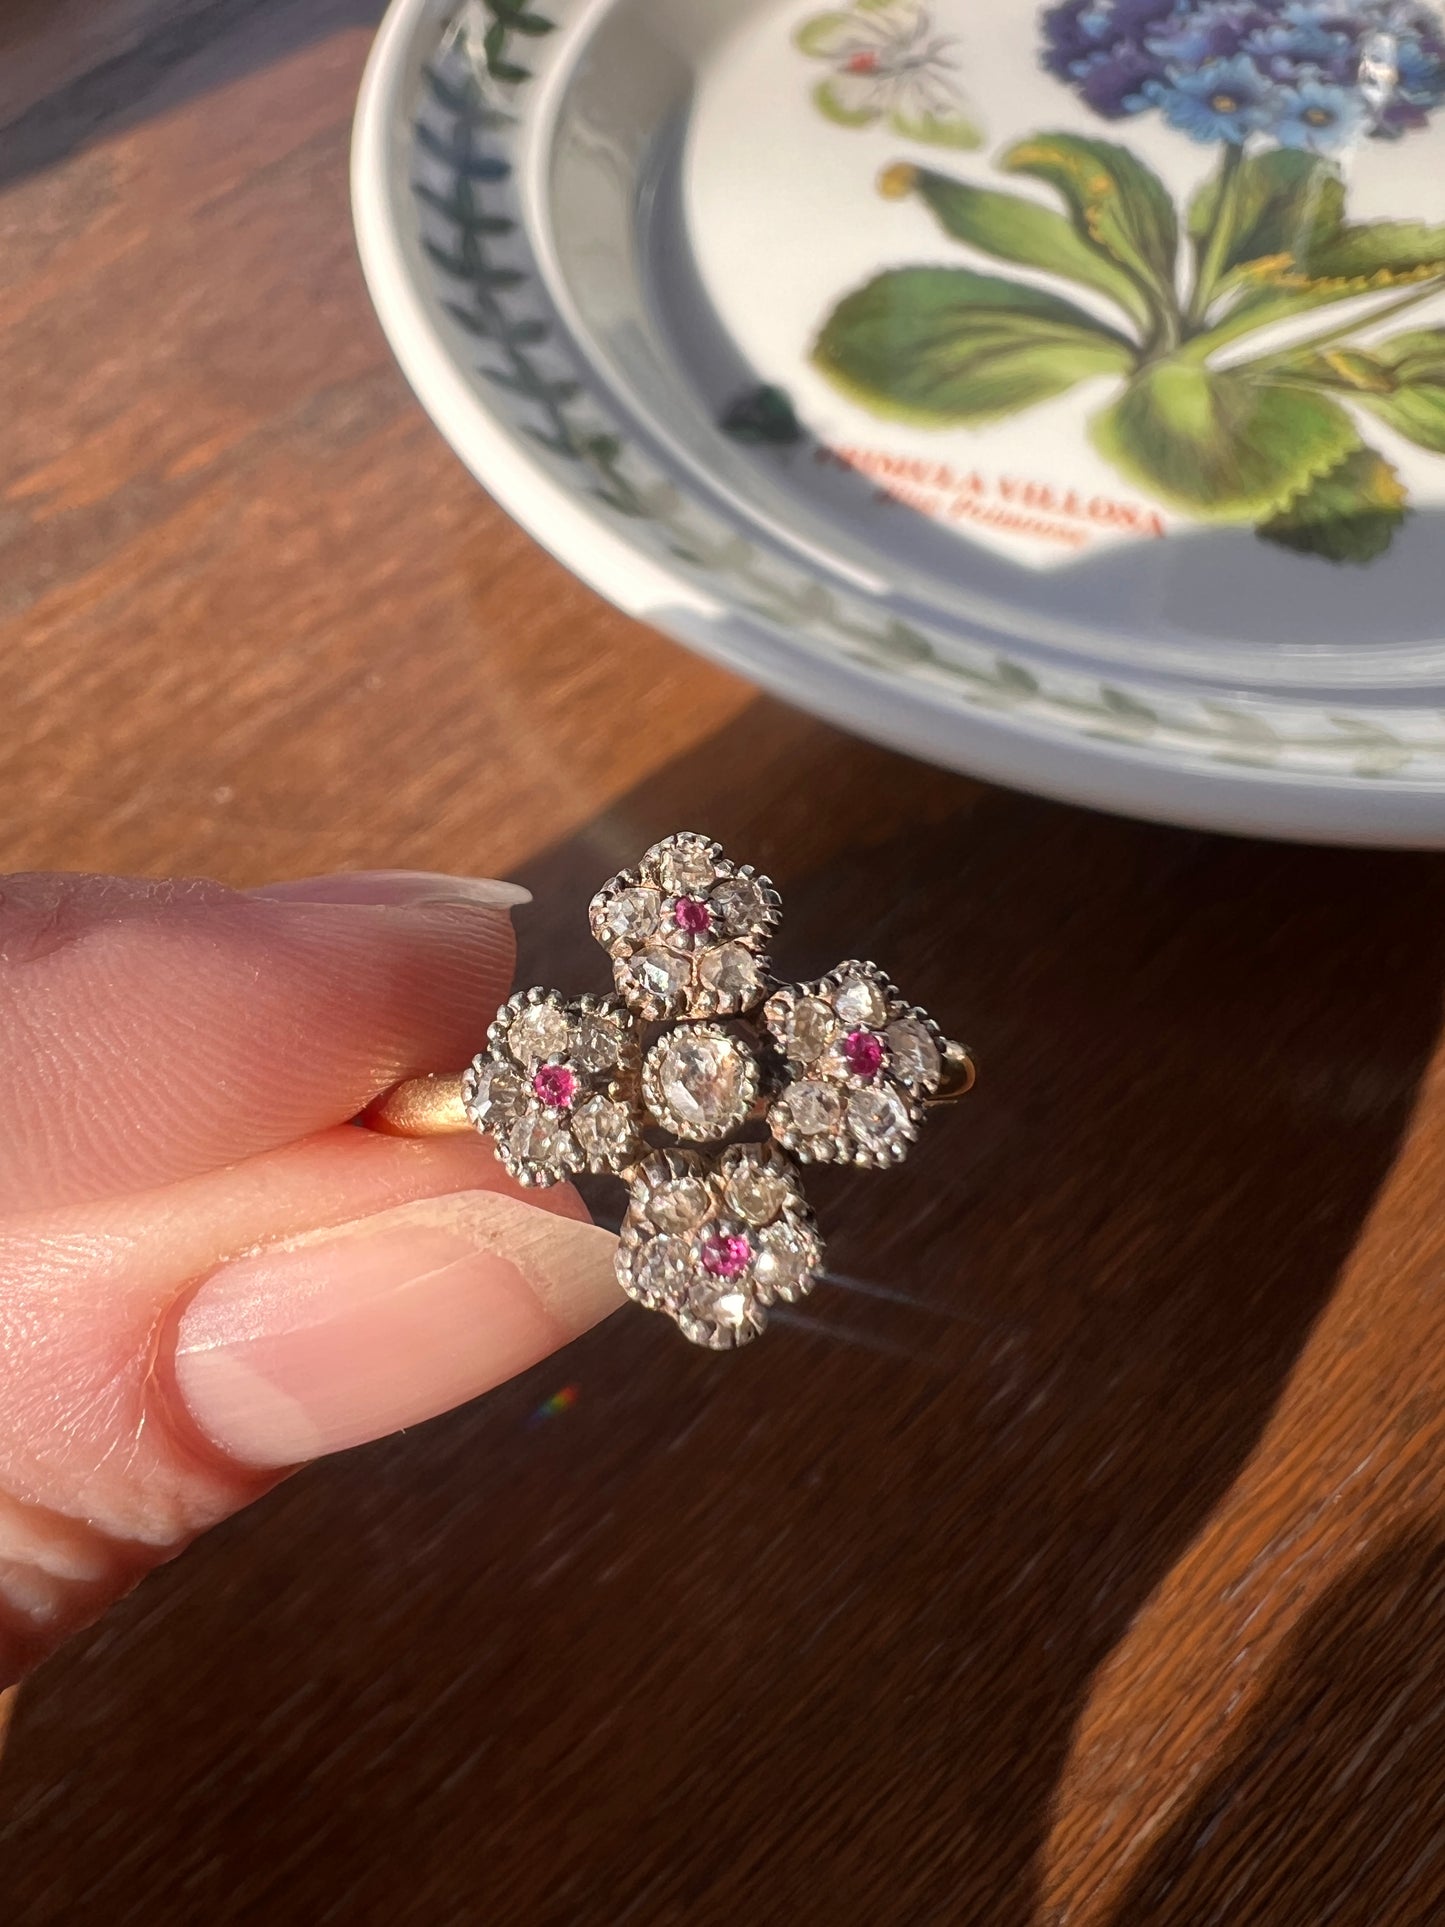 Cruciform FLORAL Rose Old Mine Cut DIAMOND Encrusted Ring Ruby Center French Georgian Victorian Antique 18k Gold